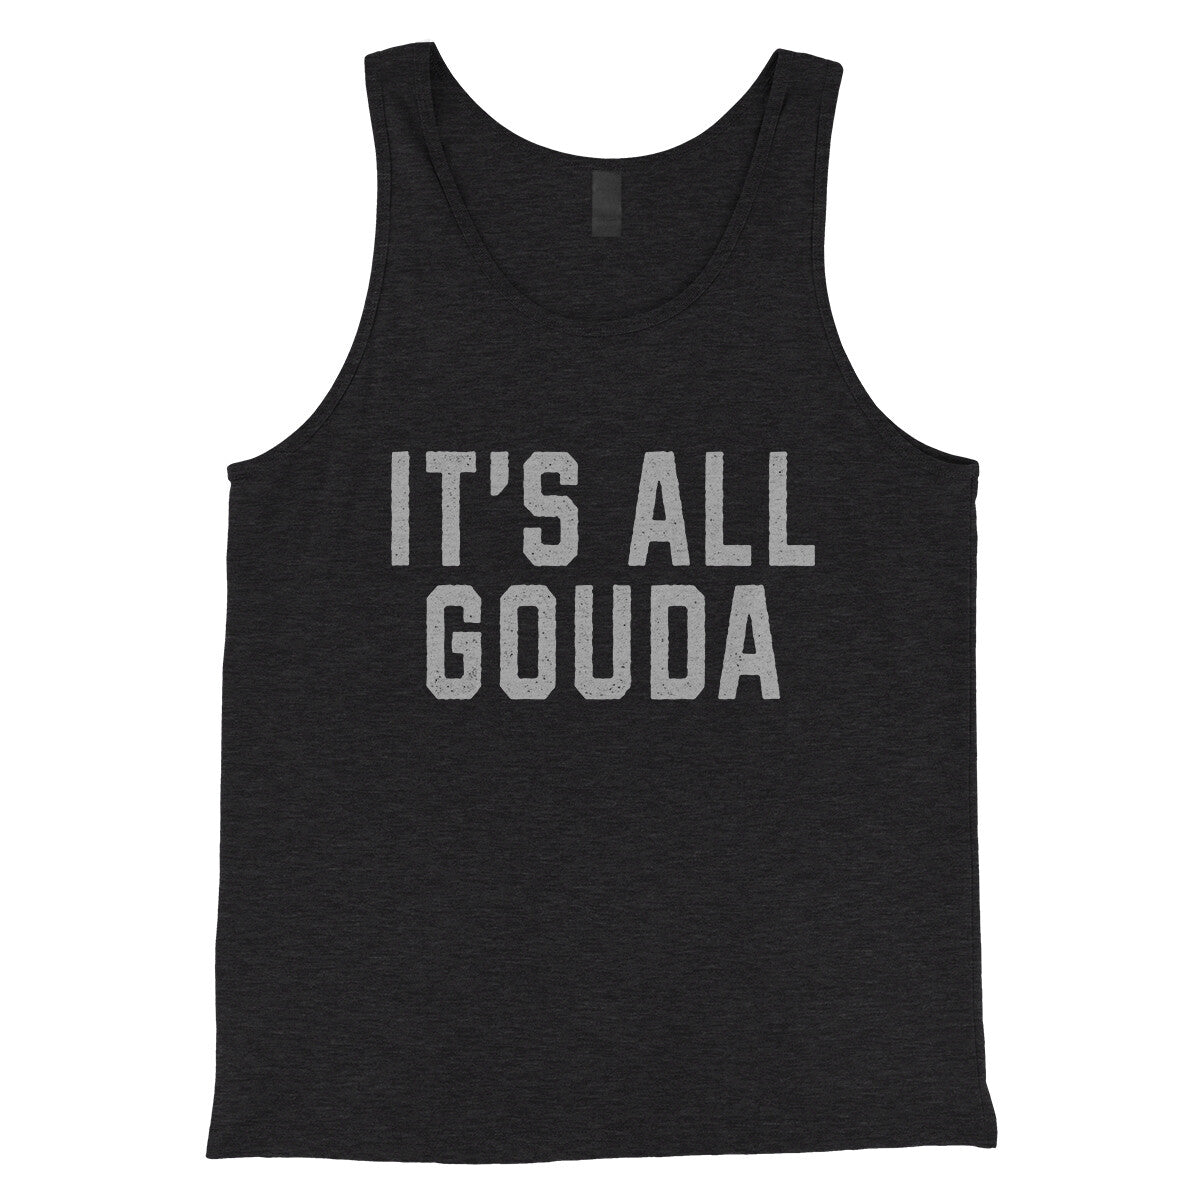 It’s All Gouda in Charcoal Black TriBlend Color